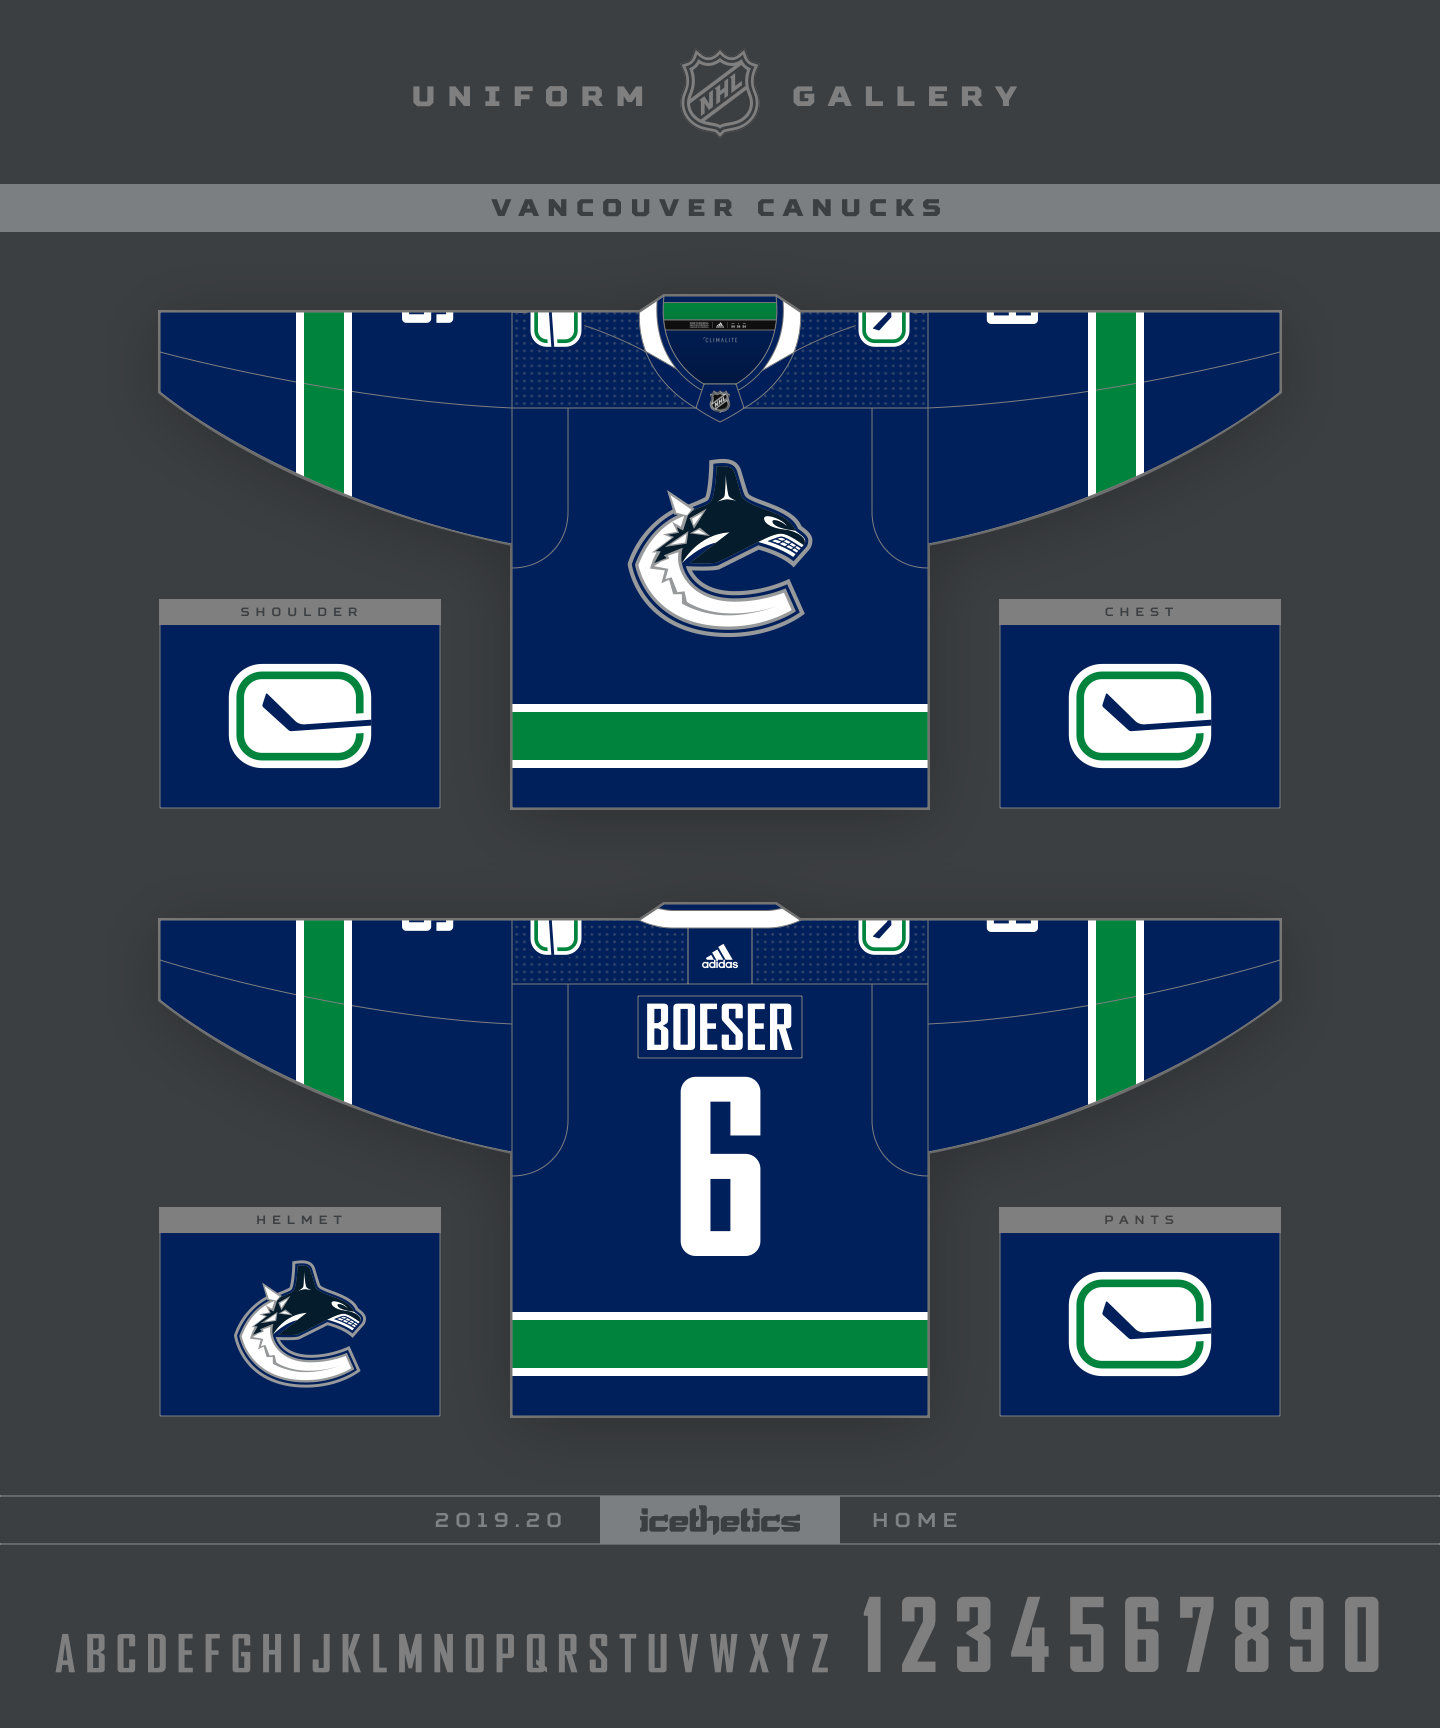  Is this Canucks jersey the first leak of 2019?